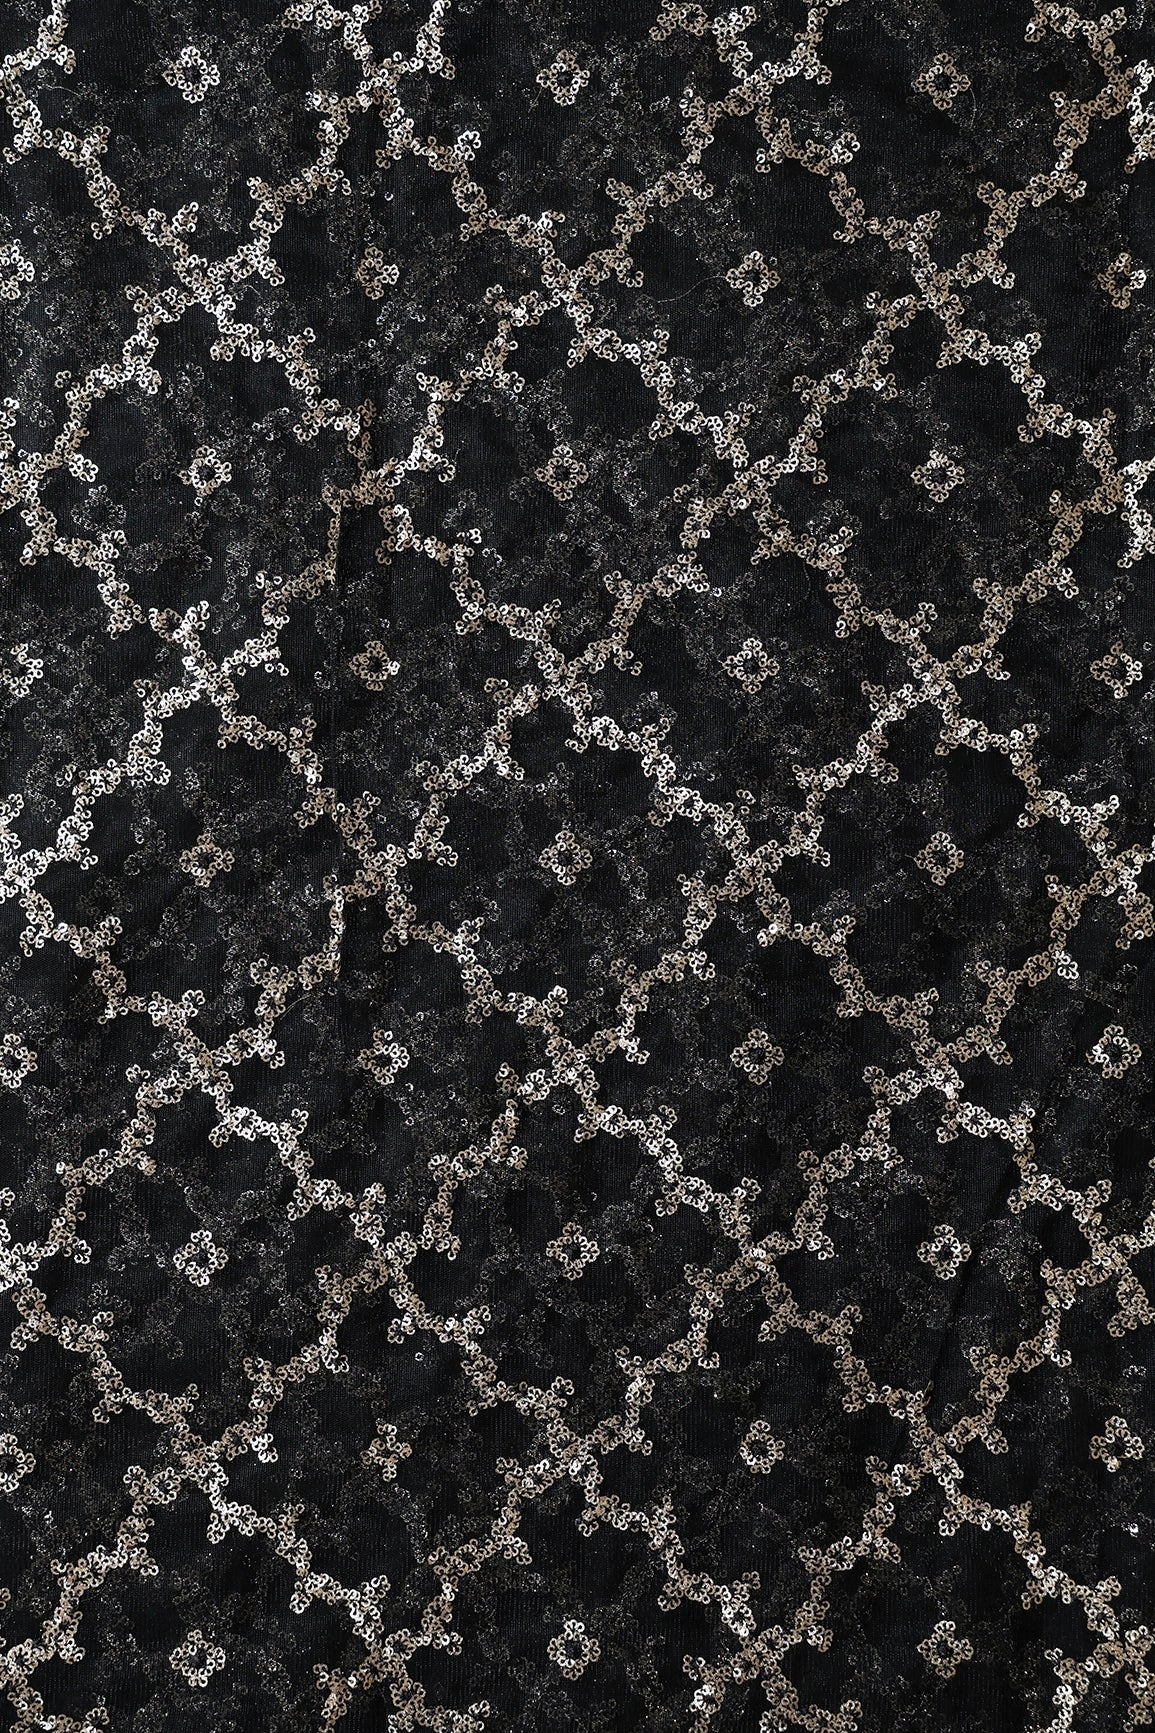 7 Meter Cut Piece Of Gold Sequins Geometric Embroidery On Black Soft Net Fabric - doeraa